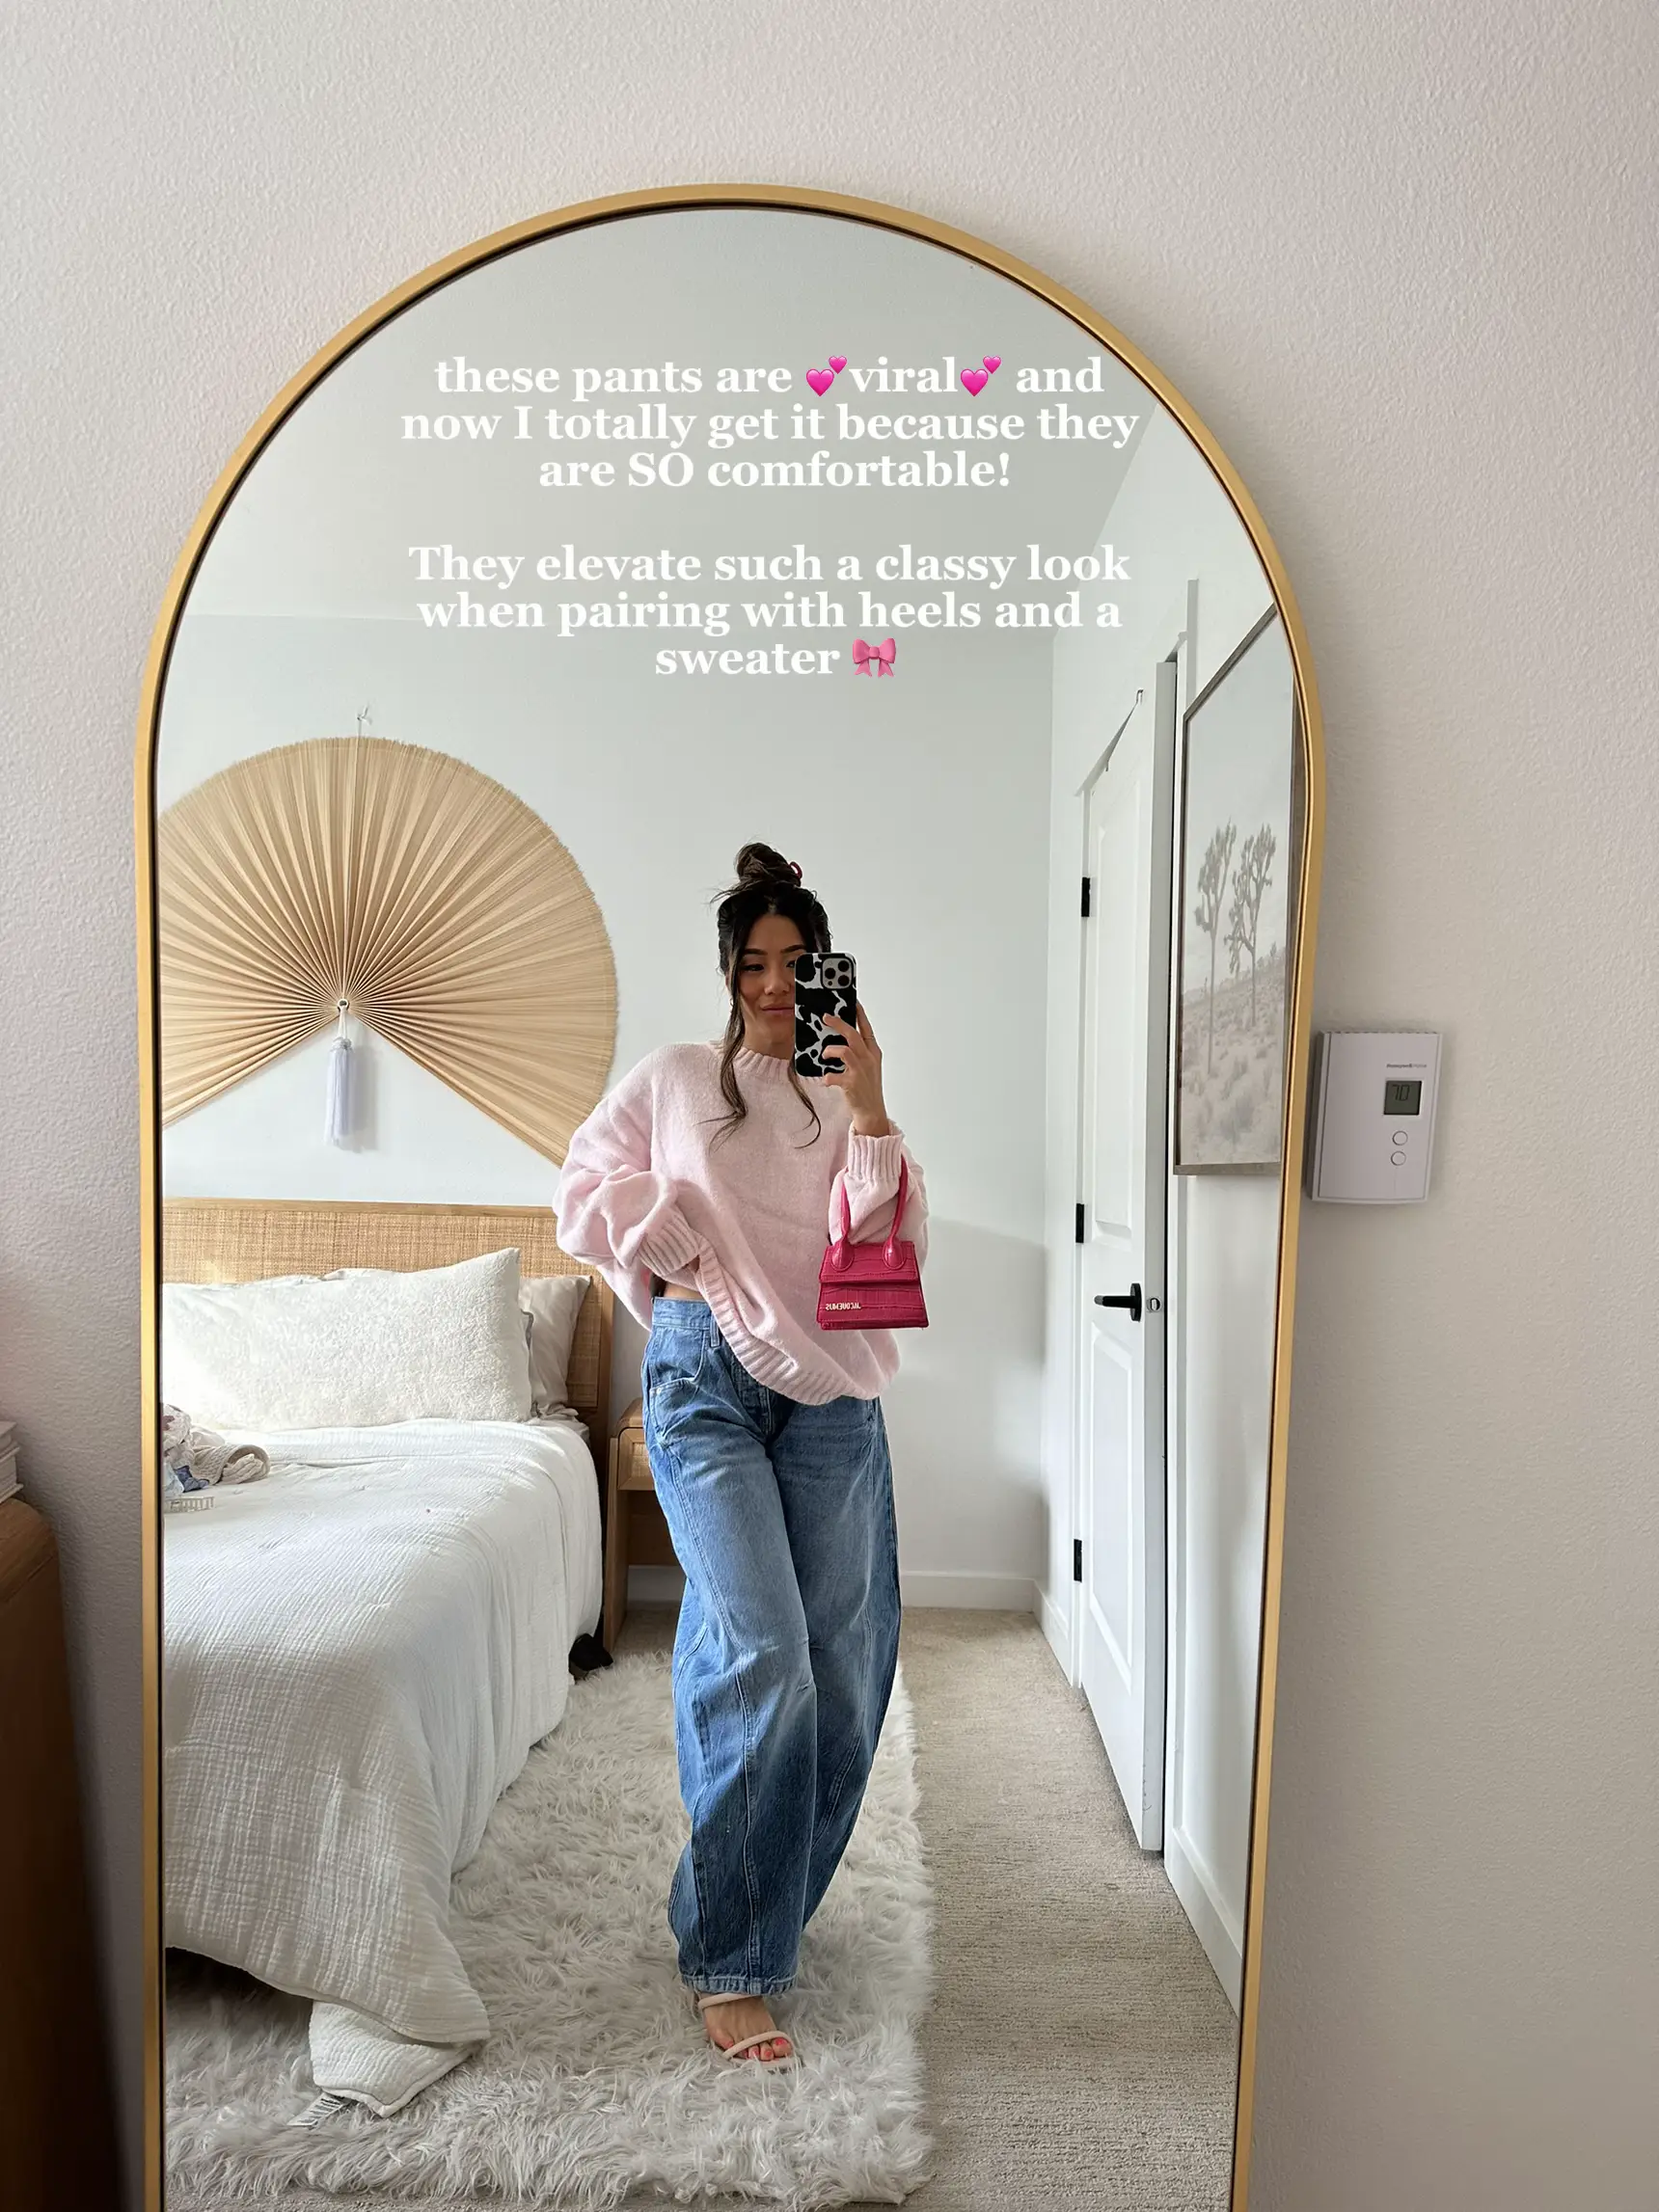 Replying to @Cristal Poppin' my top tips for finding denim that